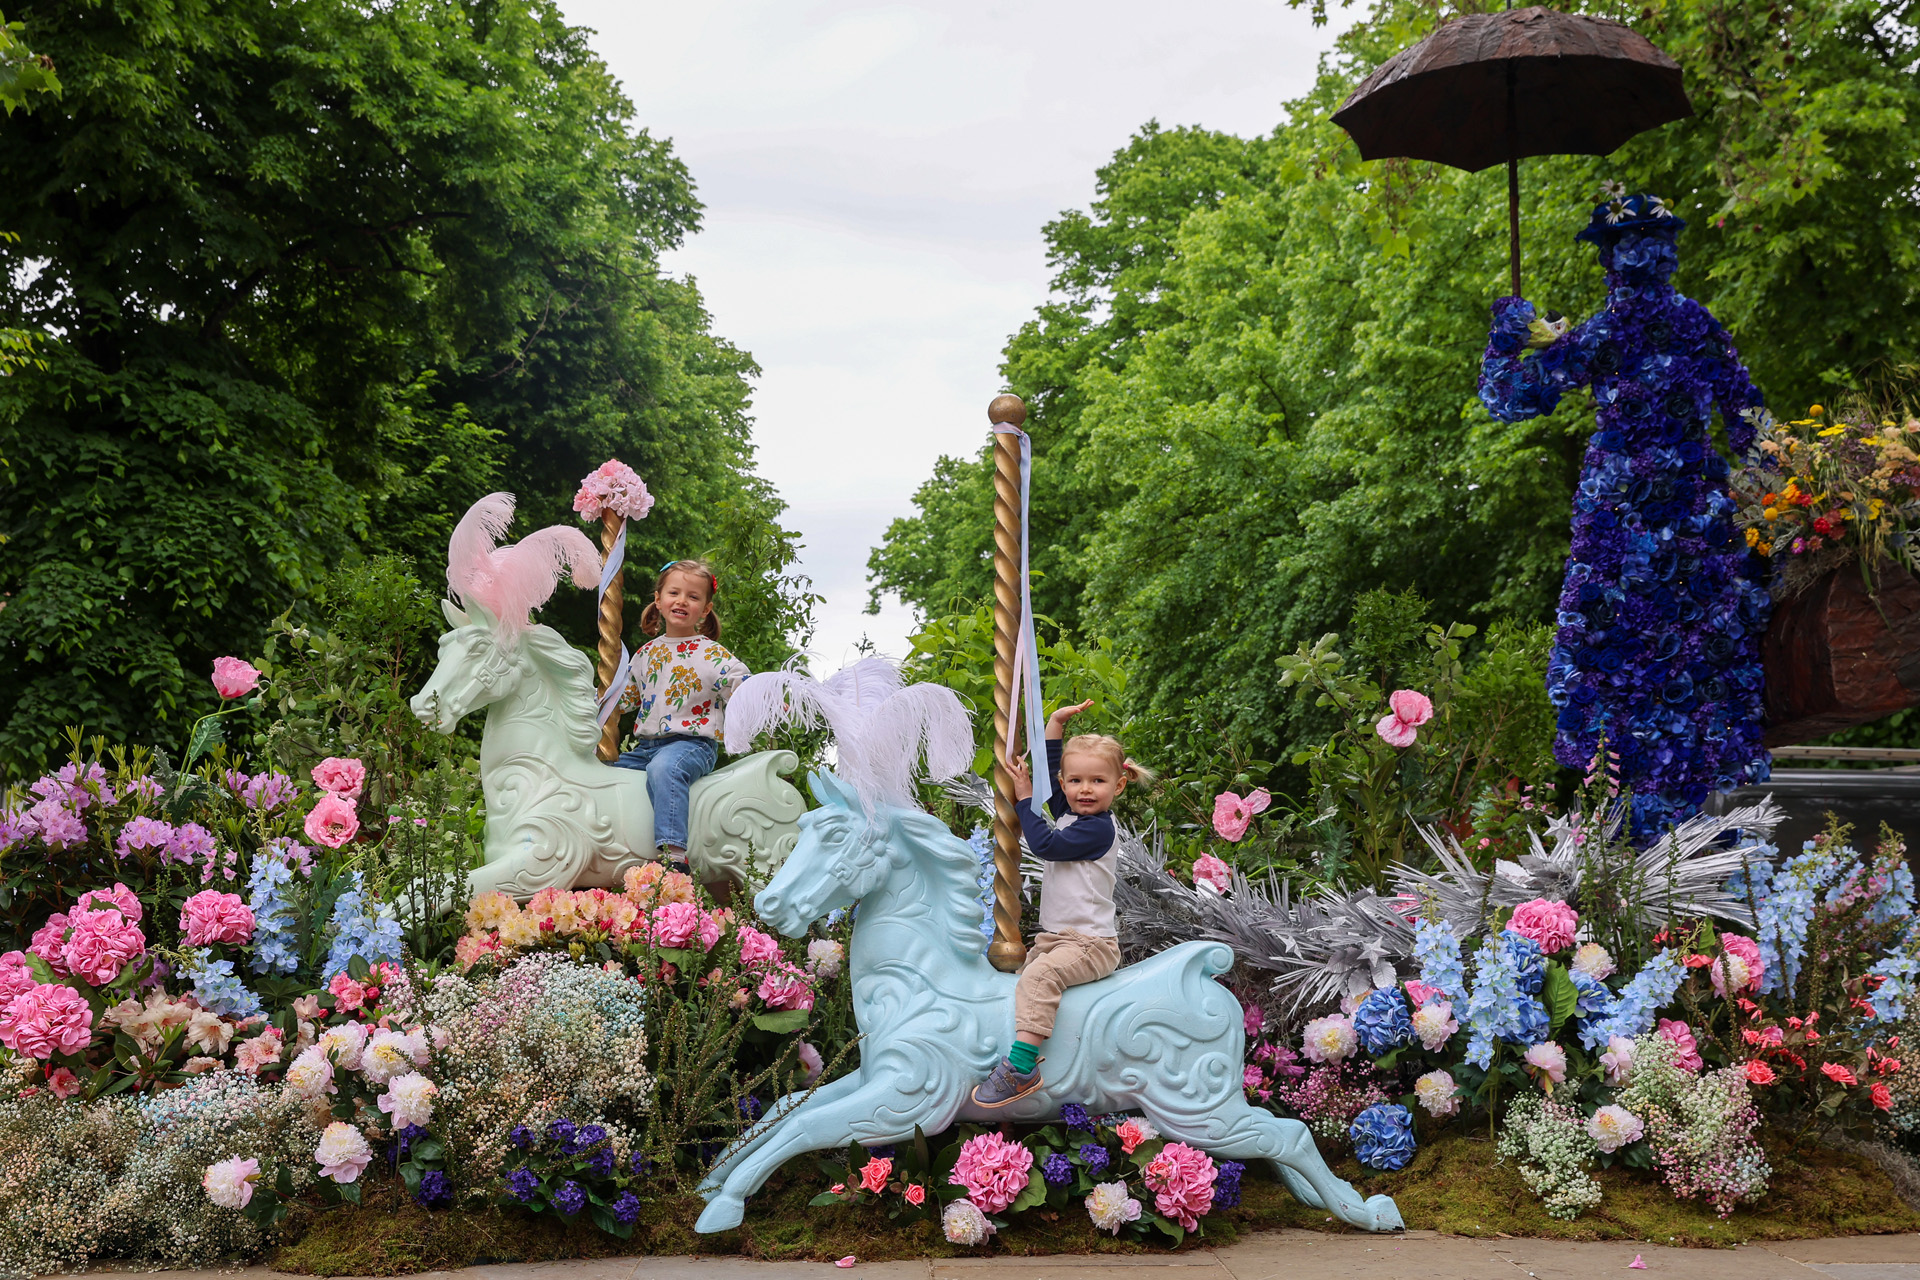 Stella Mackinnon, four and her sister Persephone Mackinnon, two at Chelsea in Bloom which launches today with the Theme "Flowers On Film" in line with the launch of the RHS Chelsea Flower Show on May 22, 2023 in London, England.